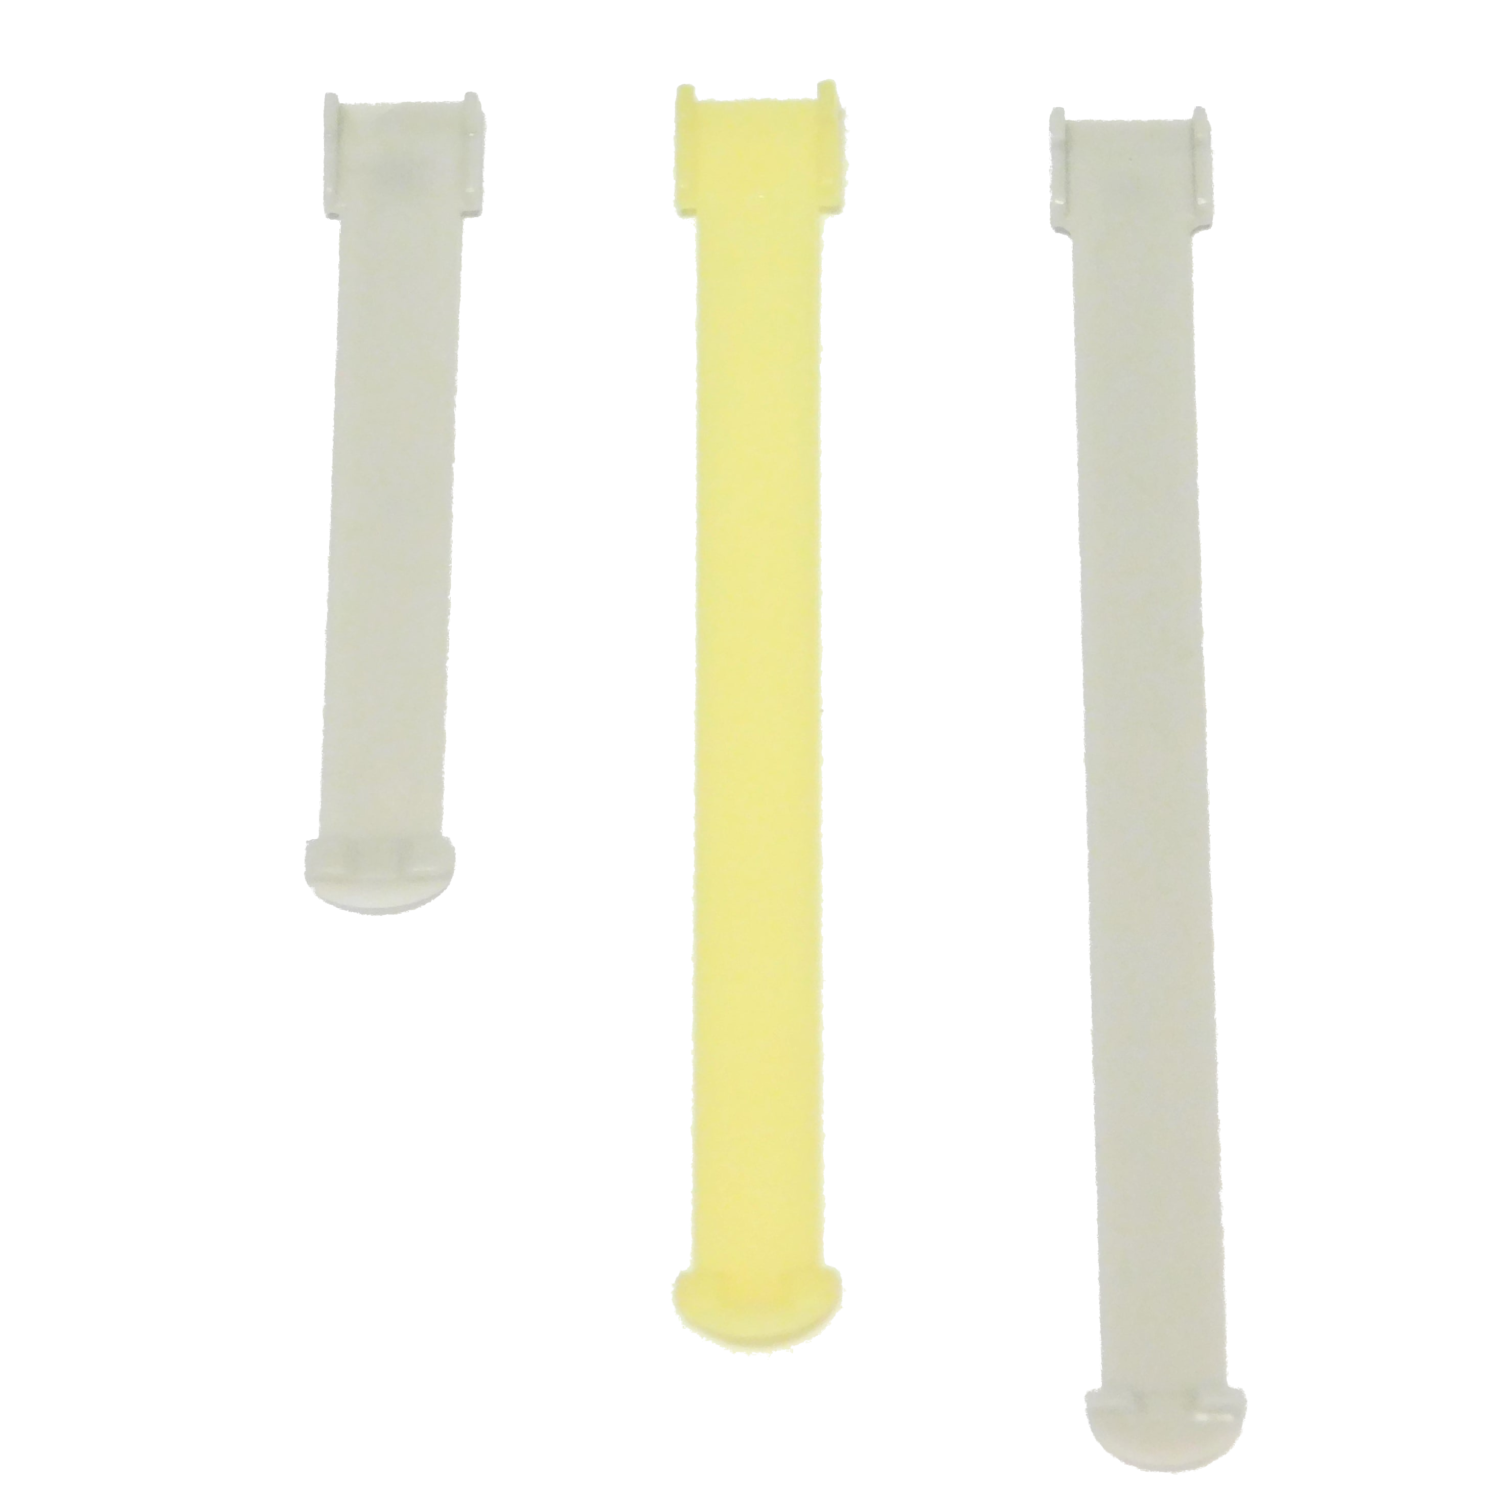 25 Carriers in a Roll With 73mm Plastic Spacer for Vertical Blinds/Shades